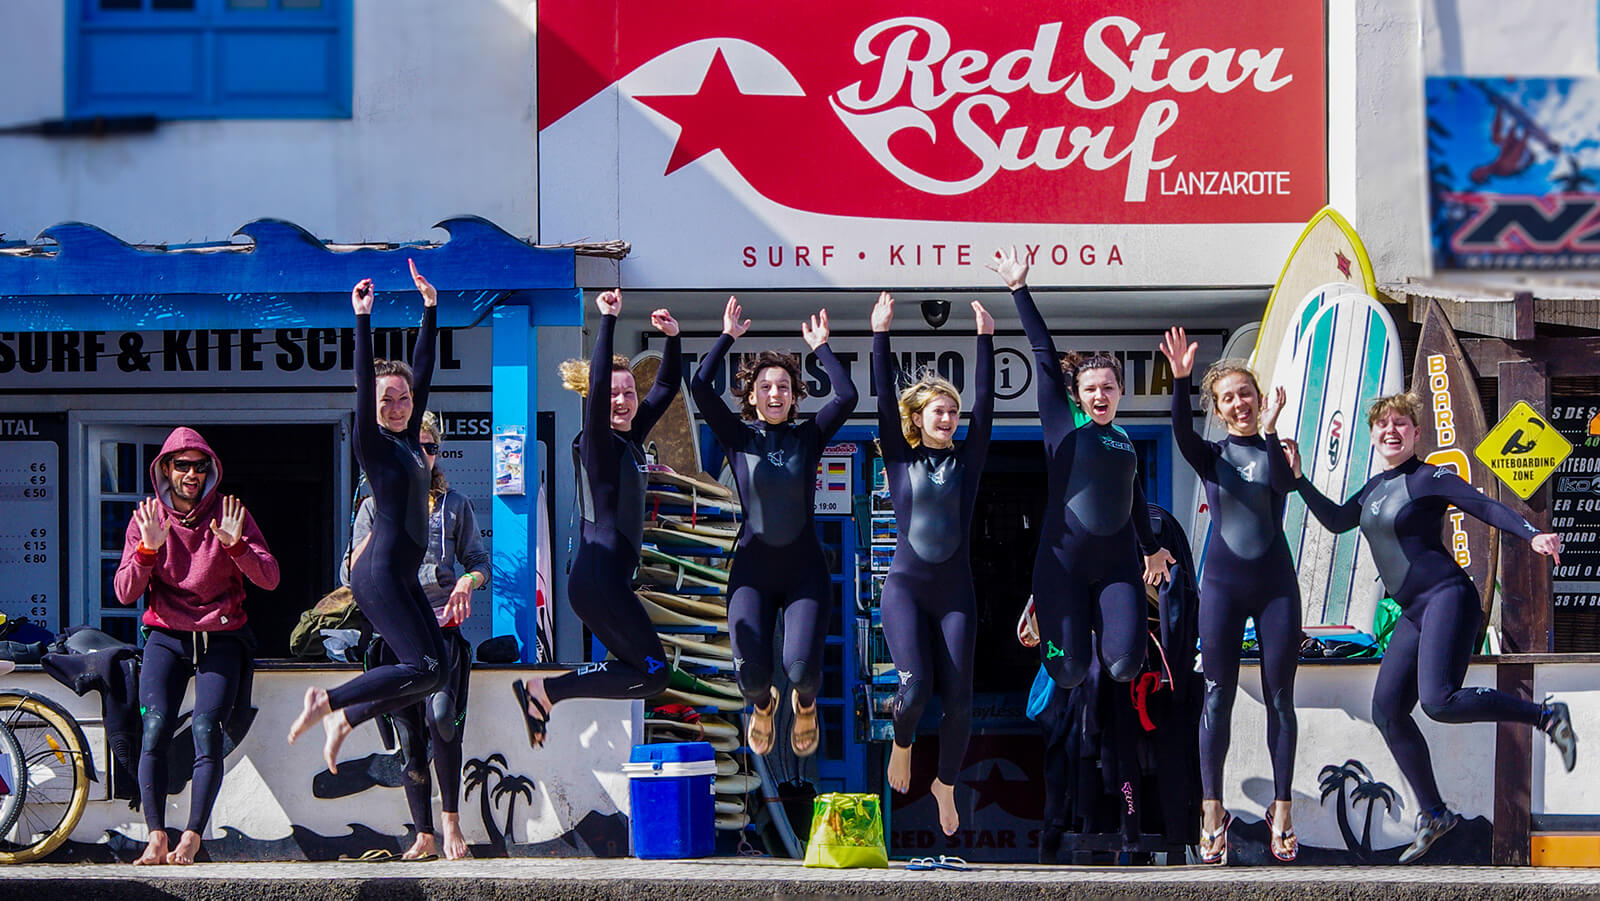 Red Star Surf - Easy Surf Camp